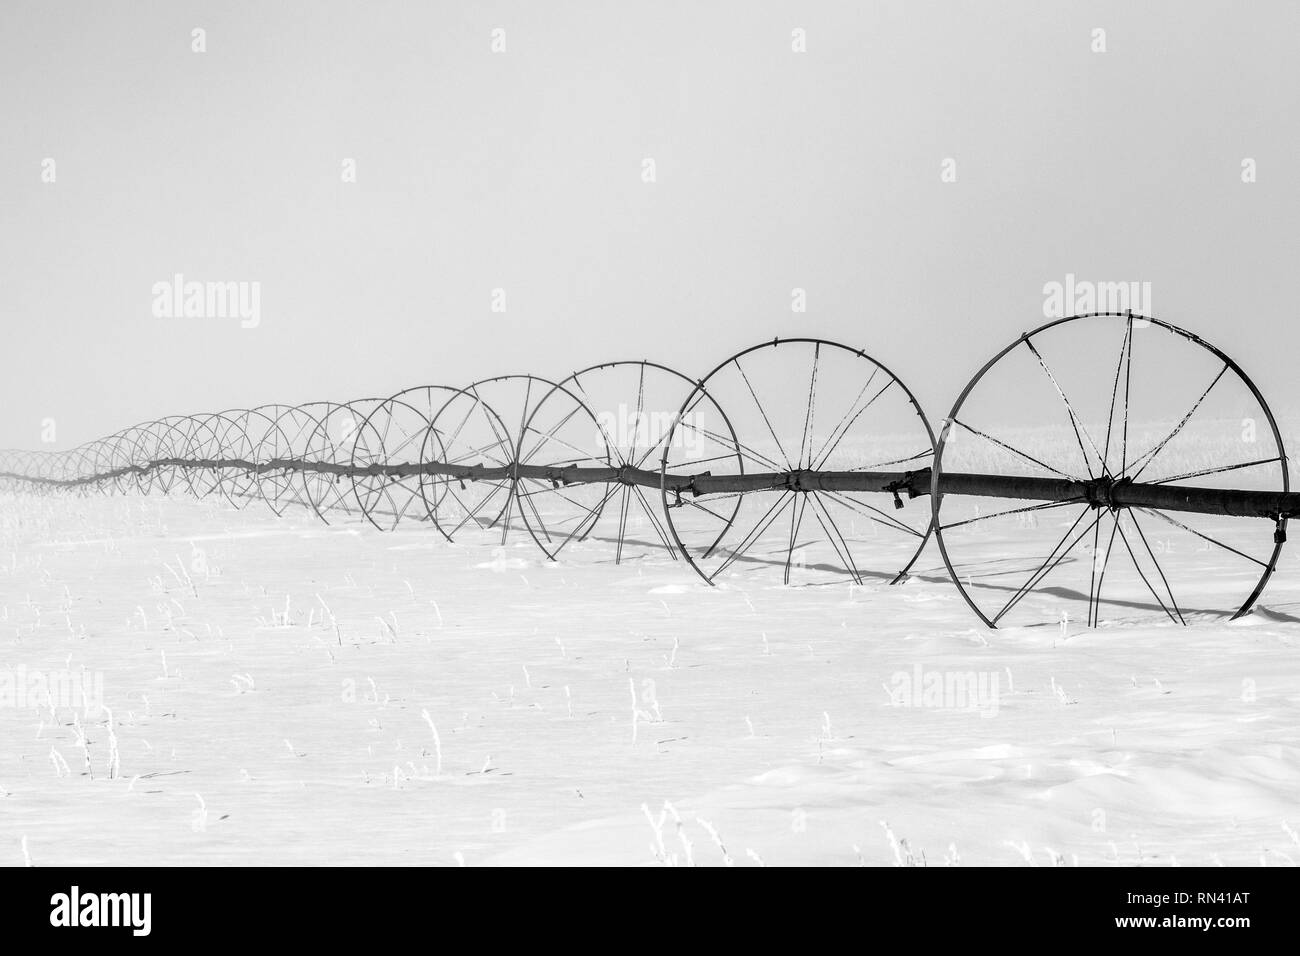 Sprinkler system on field during winter Stock Photo